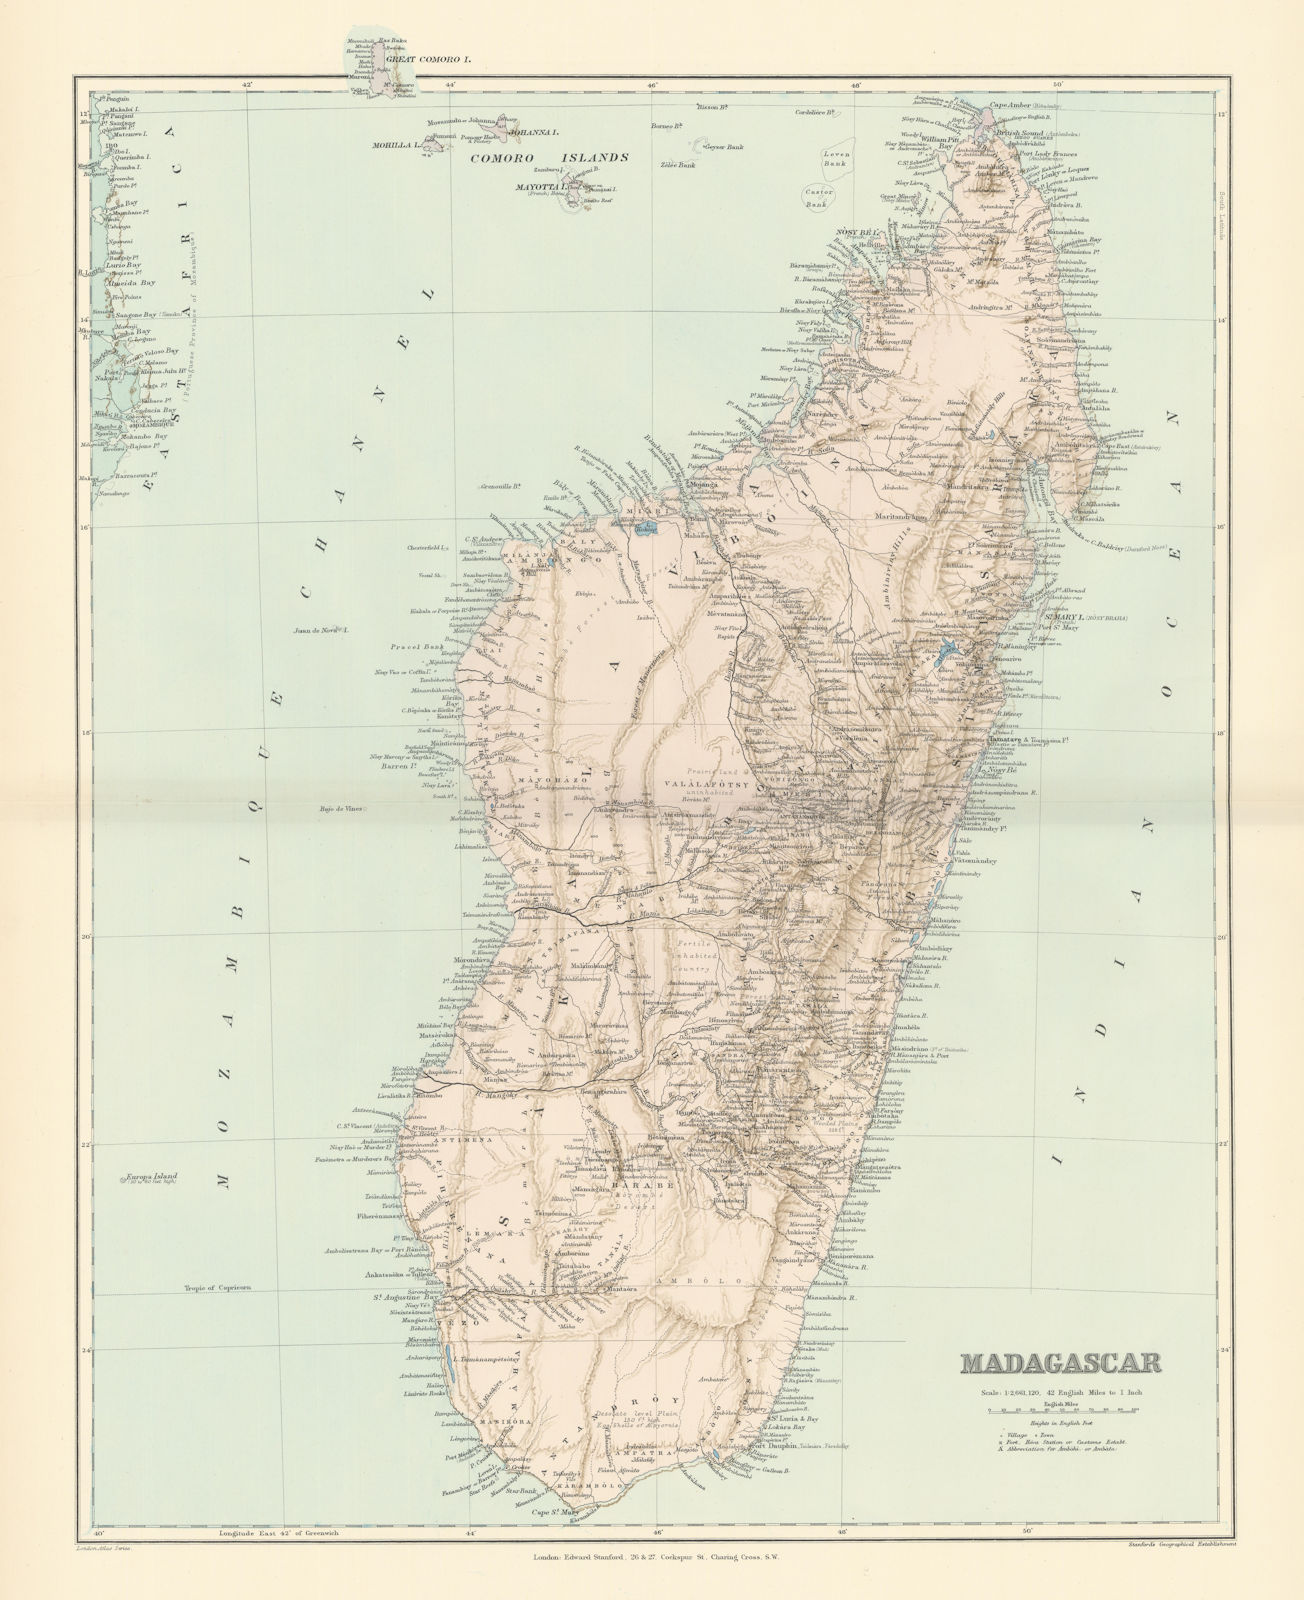 Associate Product Madagascar, Comoros & Mayotte. Mozambique coast. 50x64cm STANFORD 1896 old map